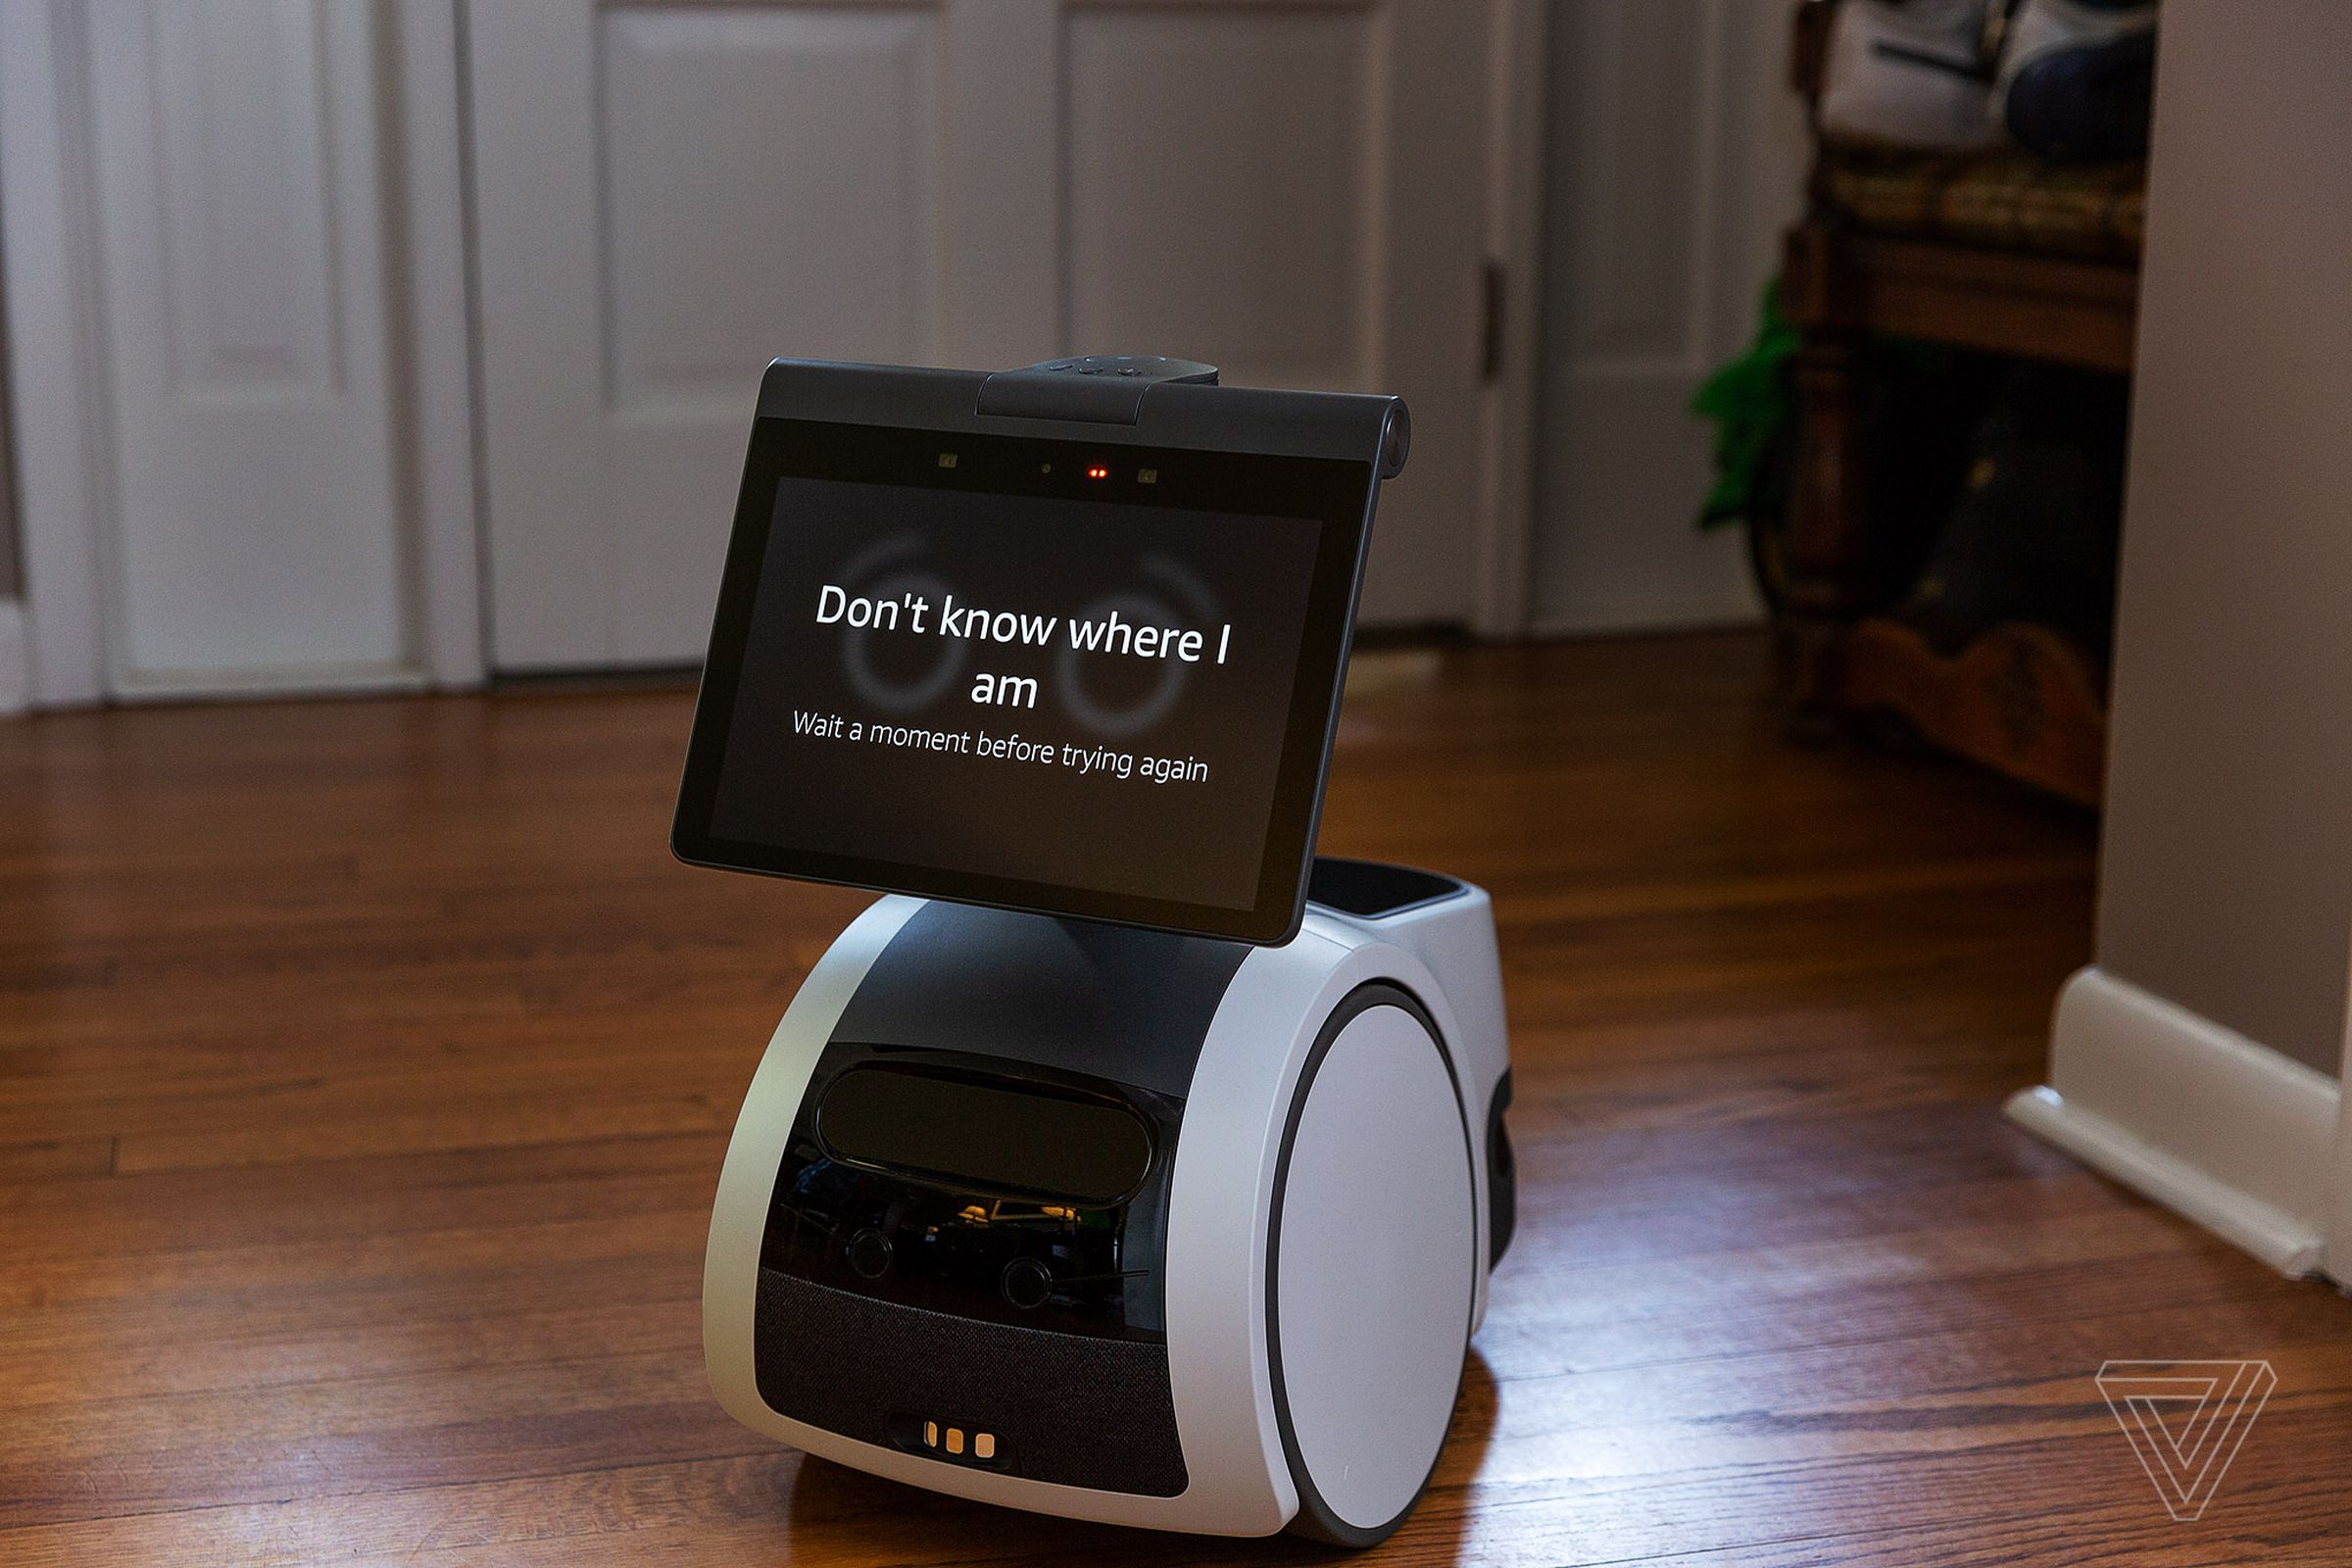 Astro doesn’t speak (only Alexa does) but displays messages on the screen when there’s a problem or to tell you what it’s doing.